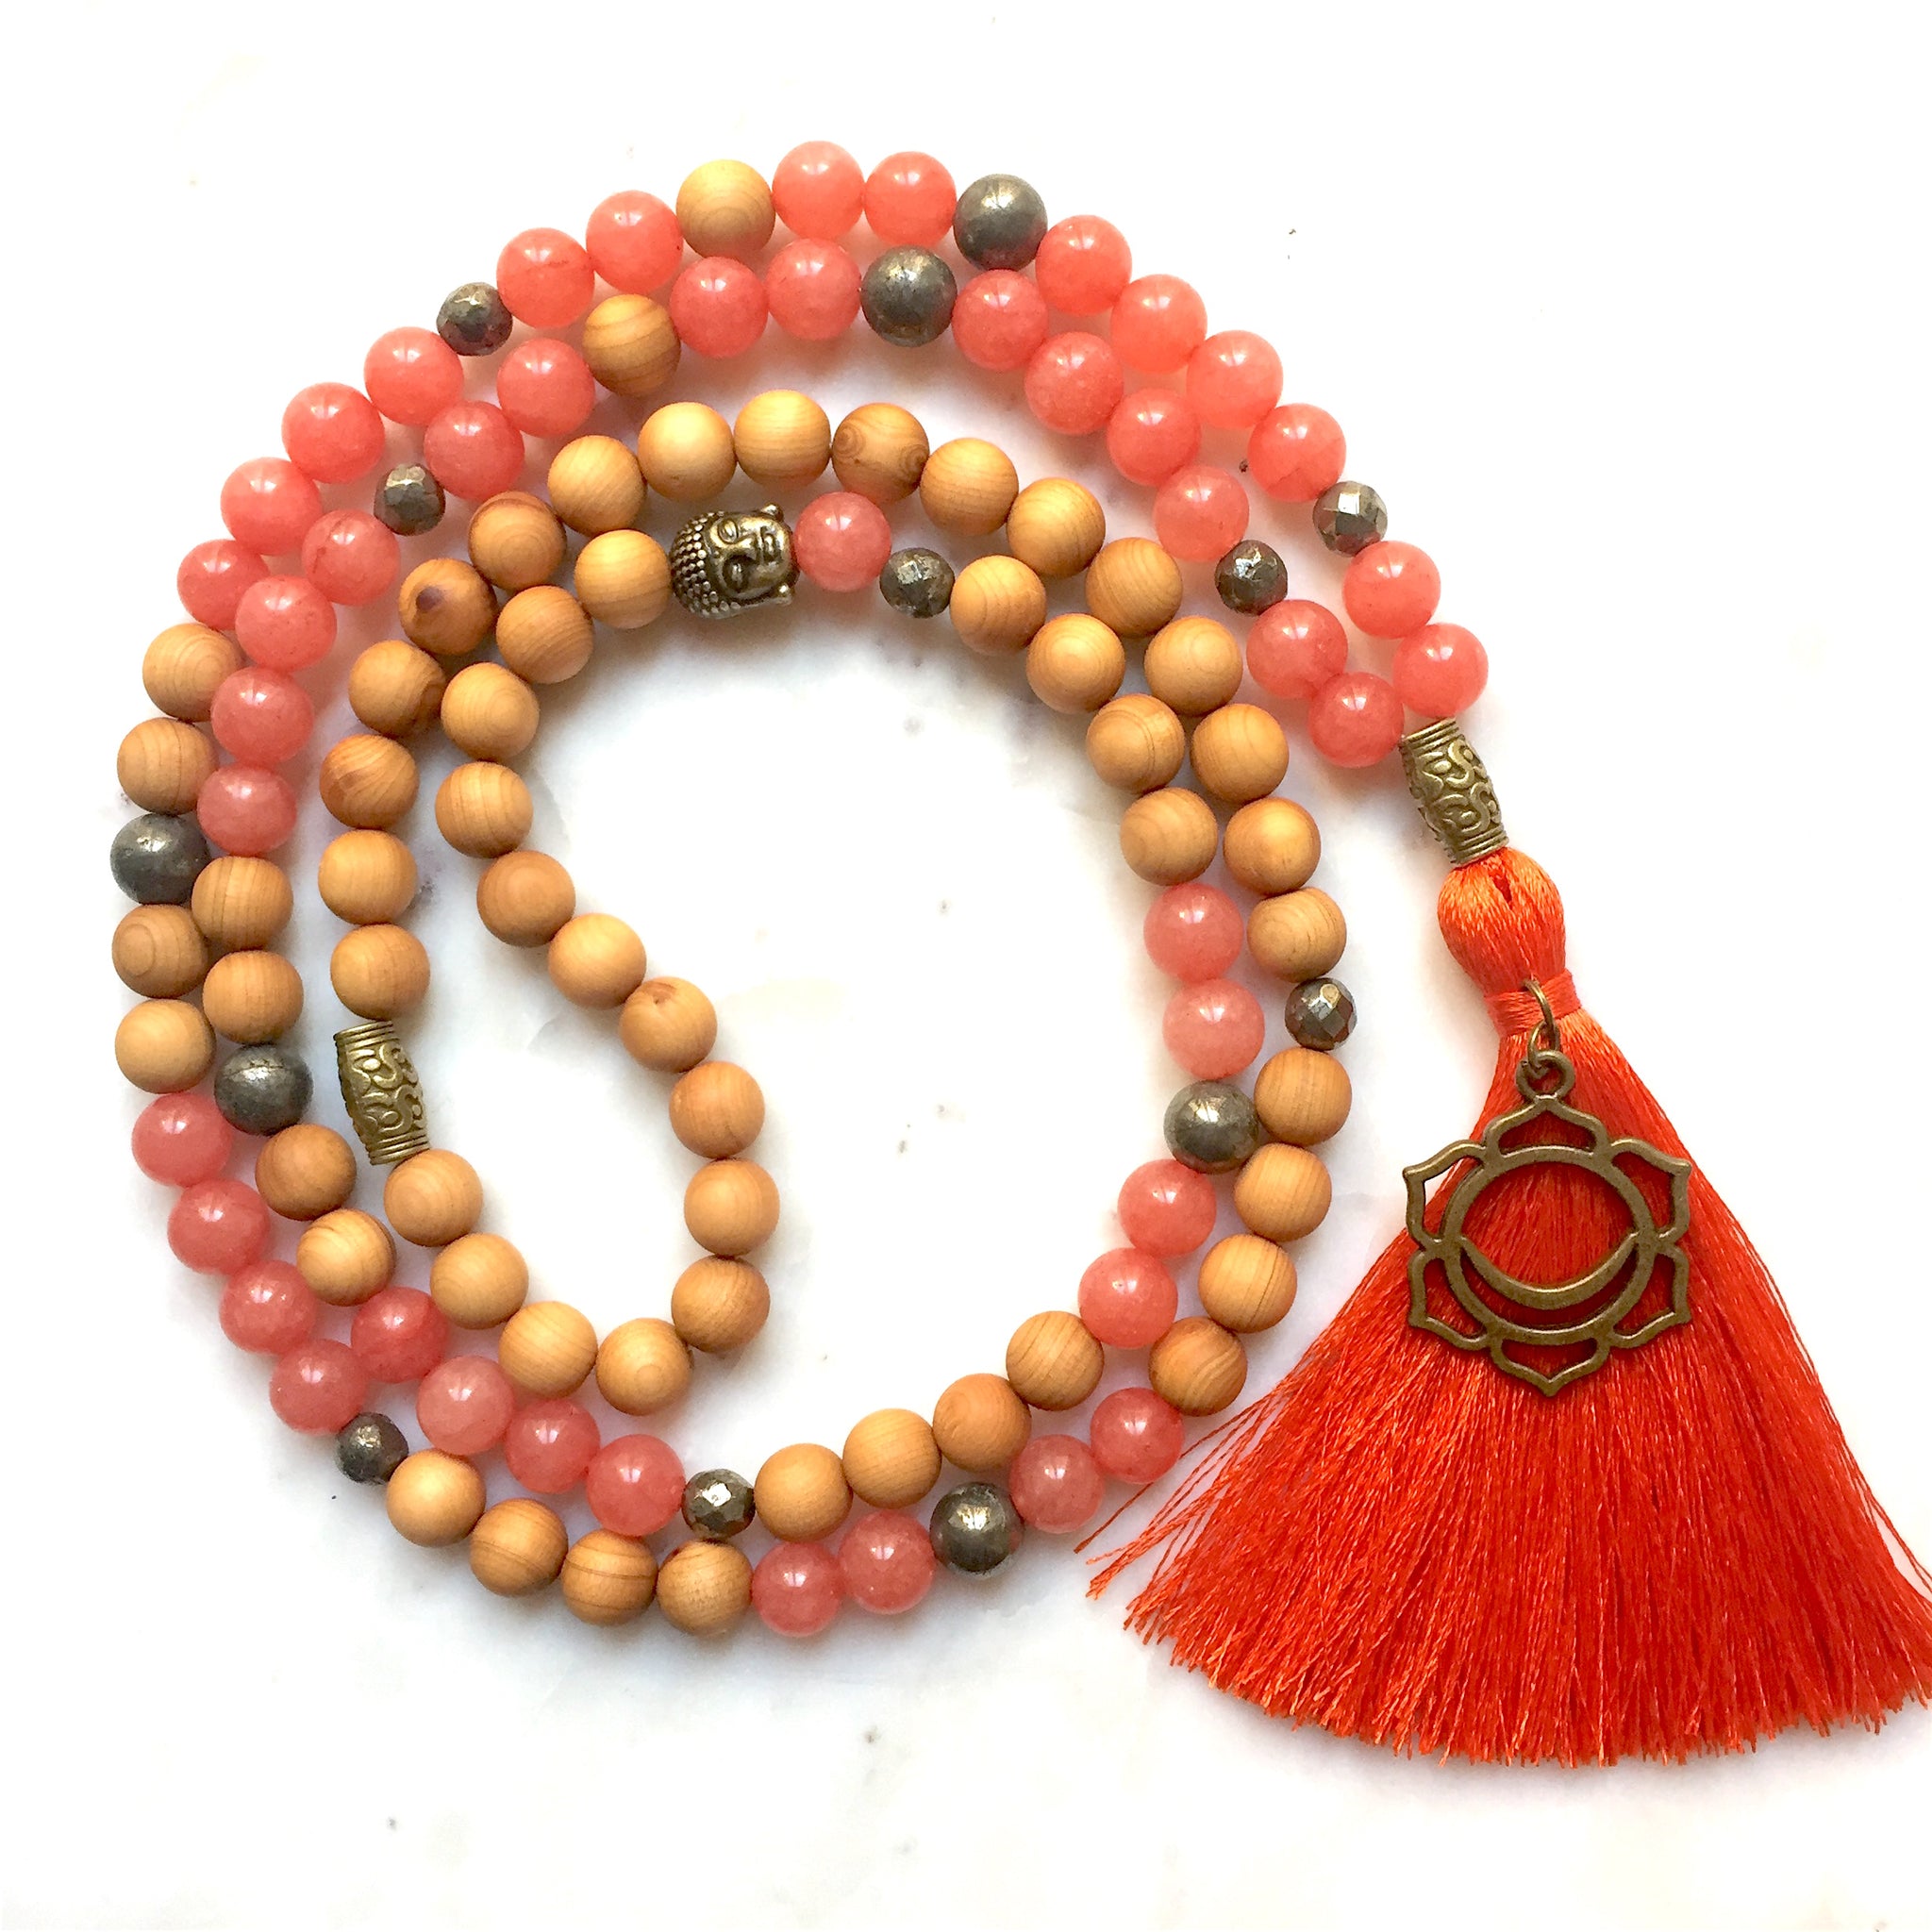 Aria Mala Atelier's unique one-of-a-kind tangerine, Sacral Chakra, Jade, Pyrite, Sandalwood Japa Mala is for yoga meditation empowering spiritual daily practise and intention setting